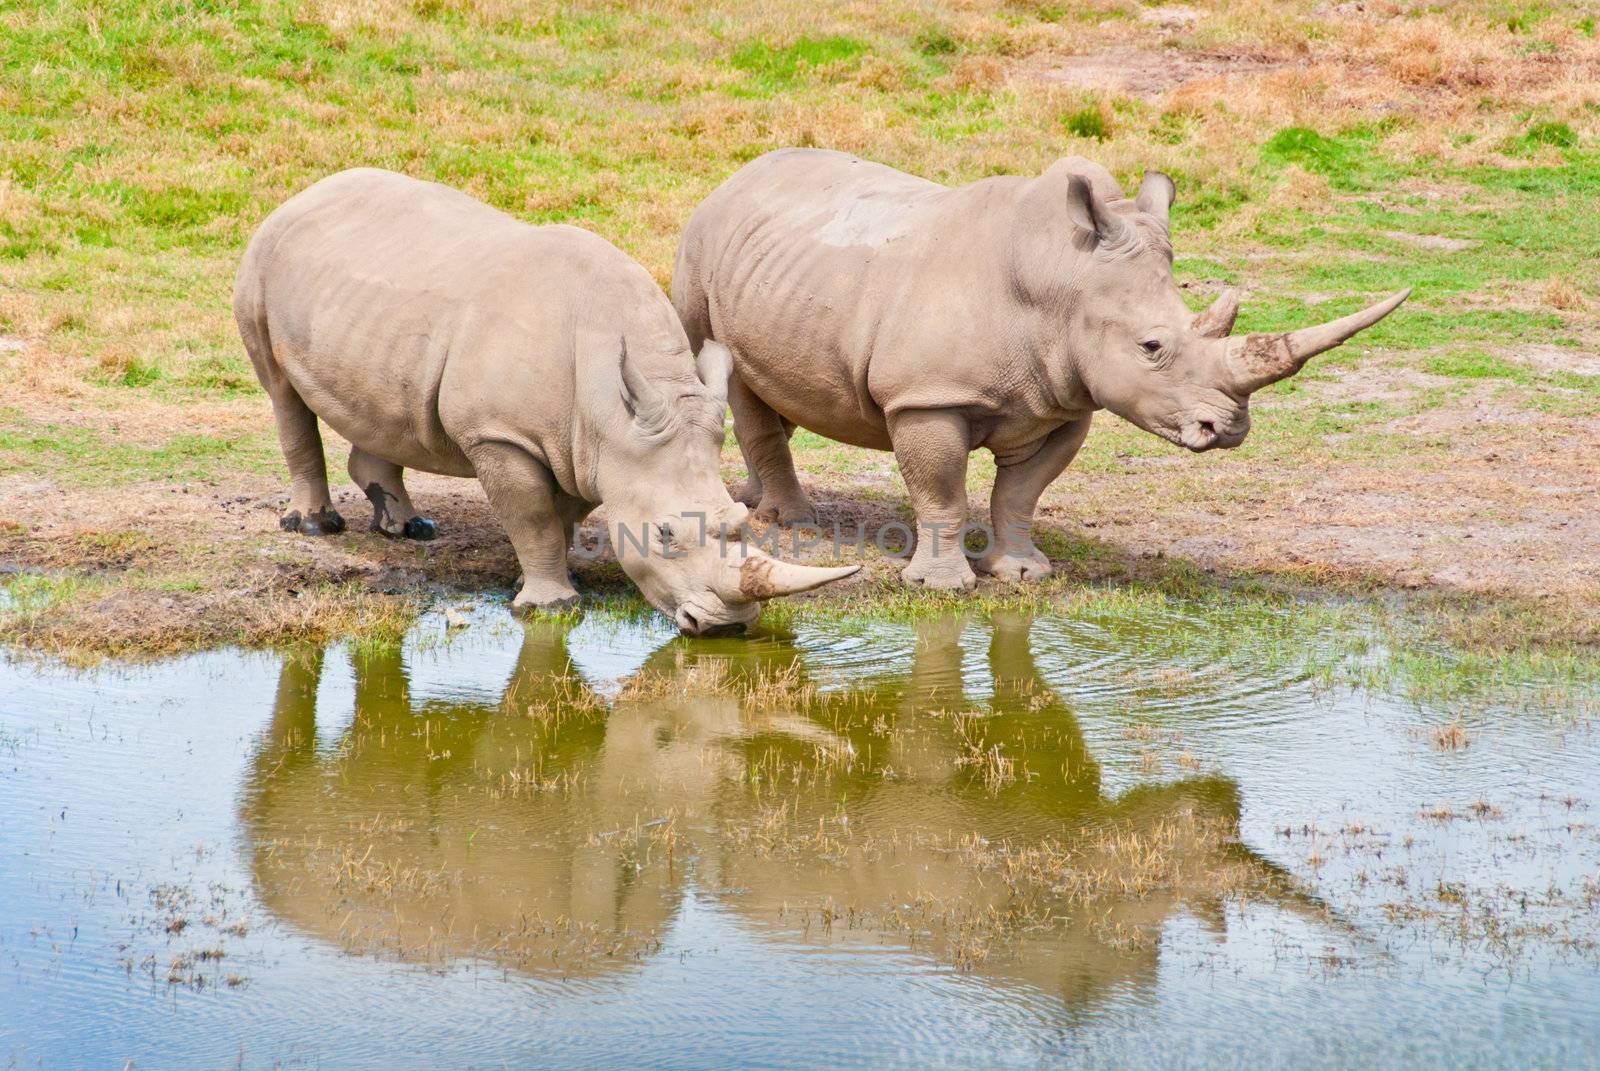 Rhino Couple At Watersedge. The Animals are reflected on the water